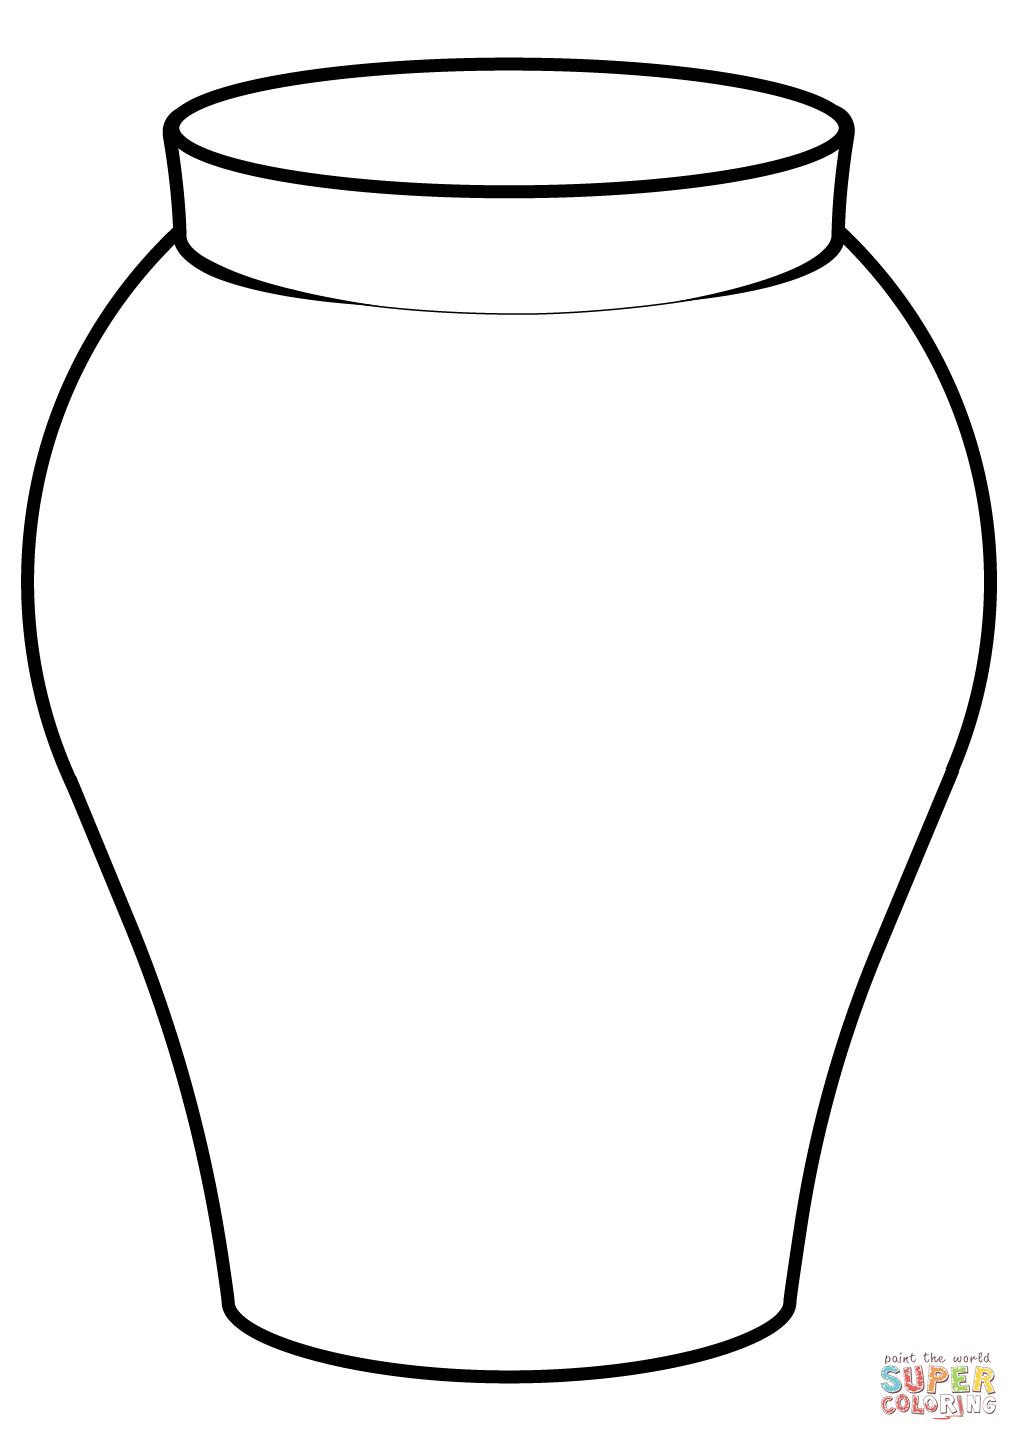 Vase outline coloring page free printable coloring pages